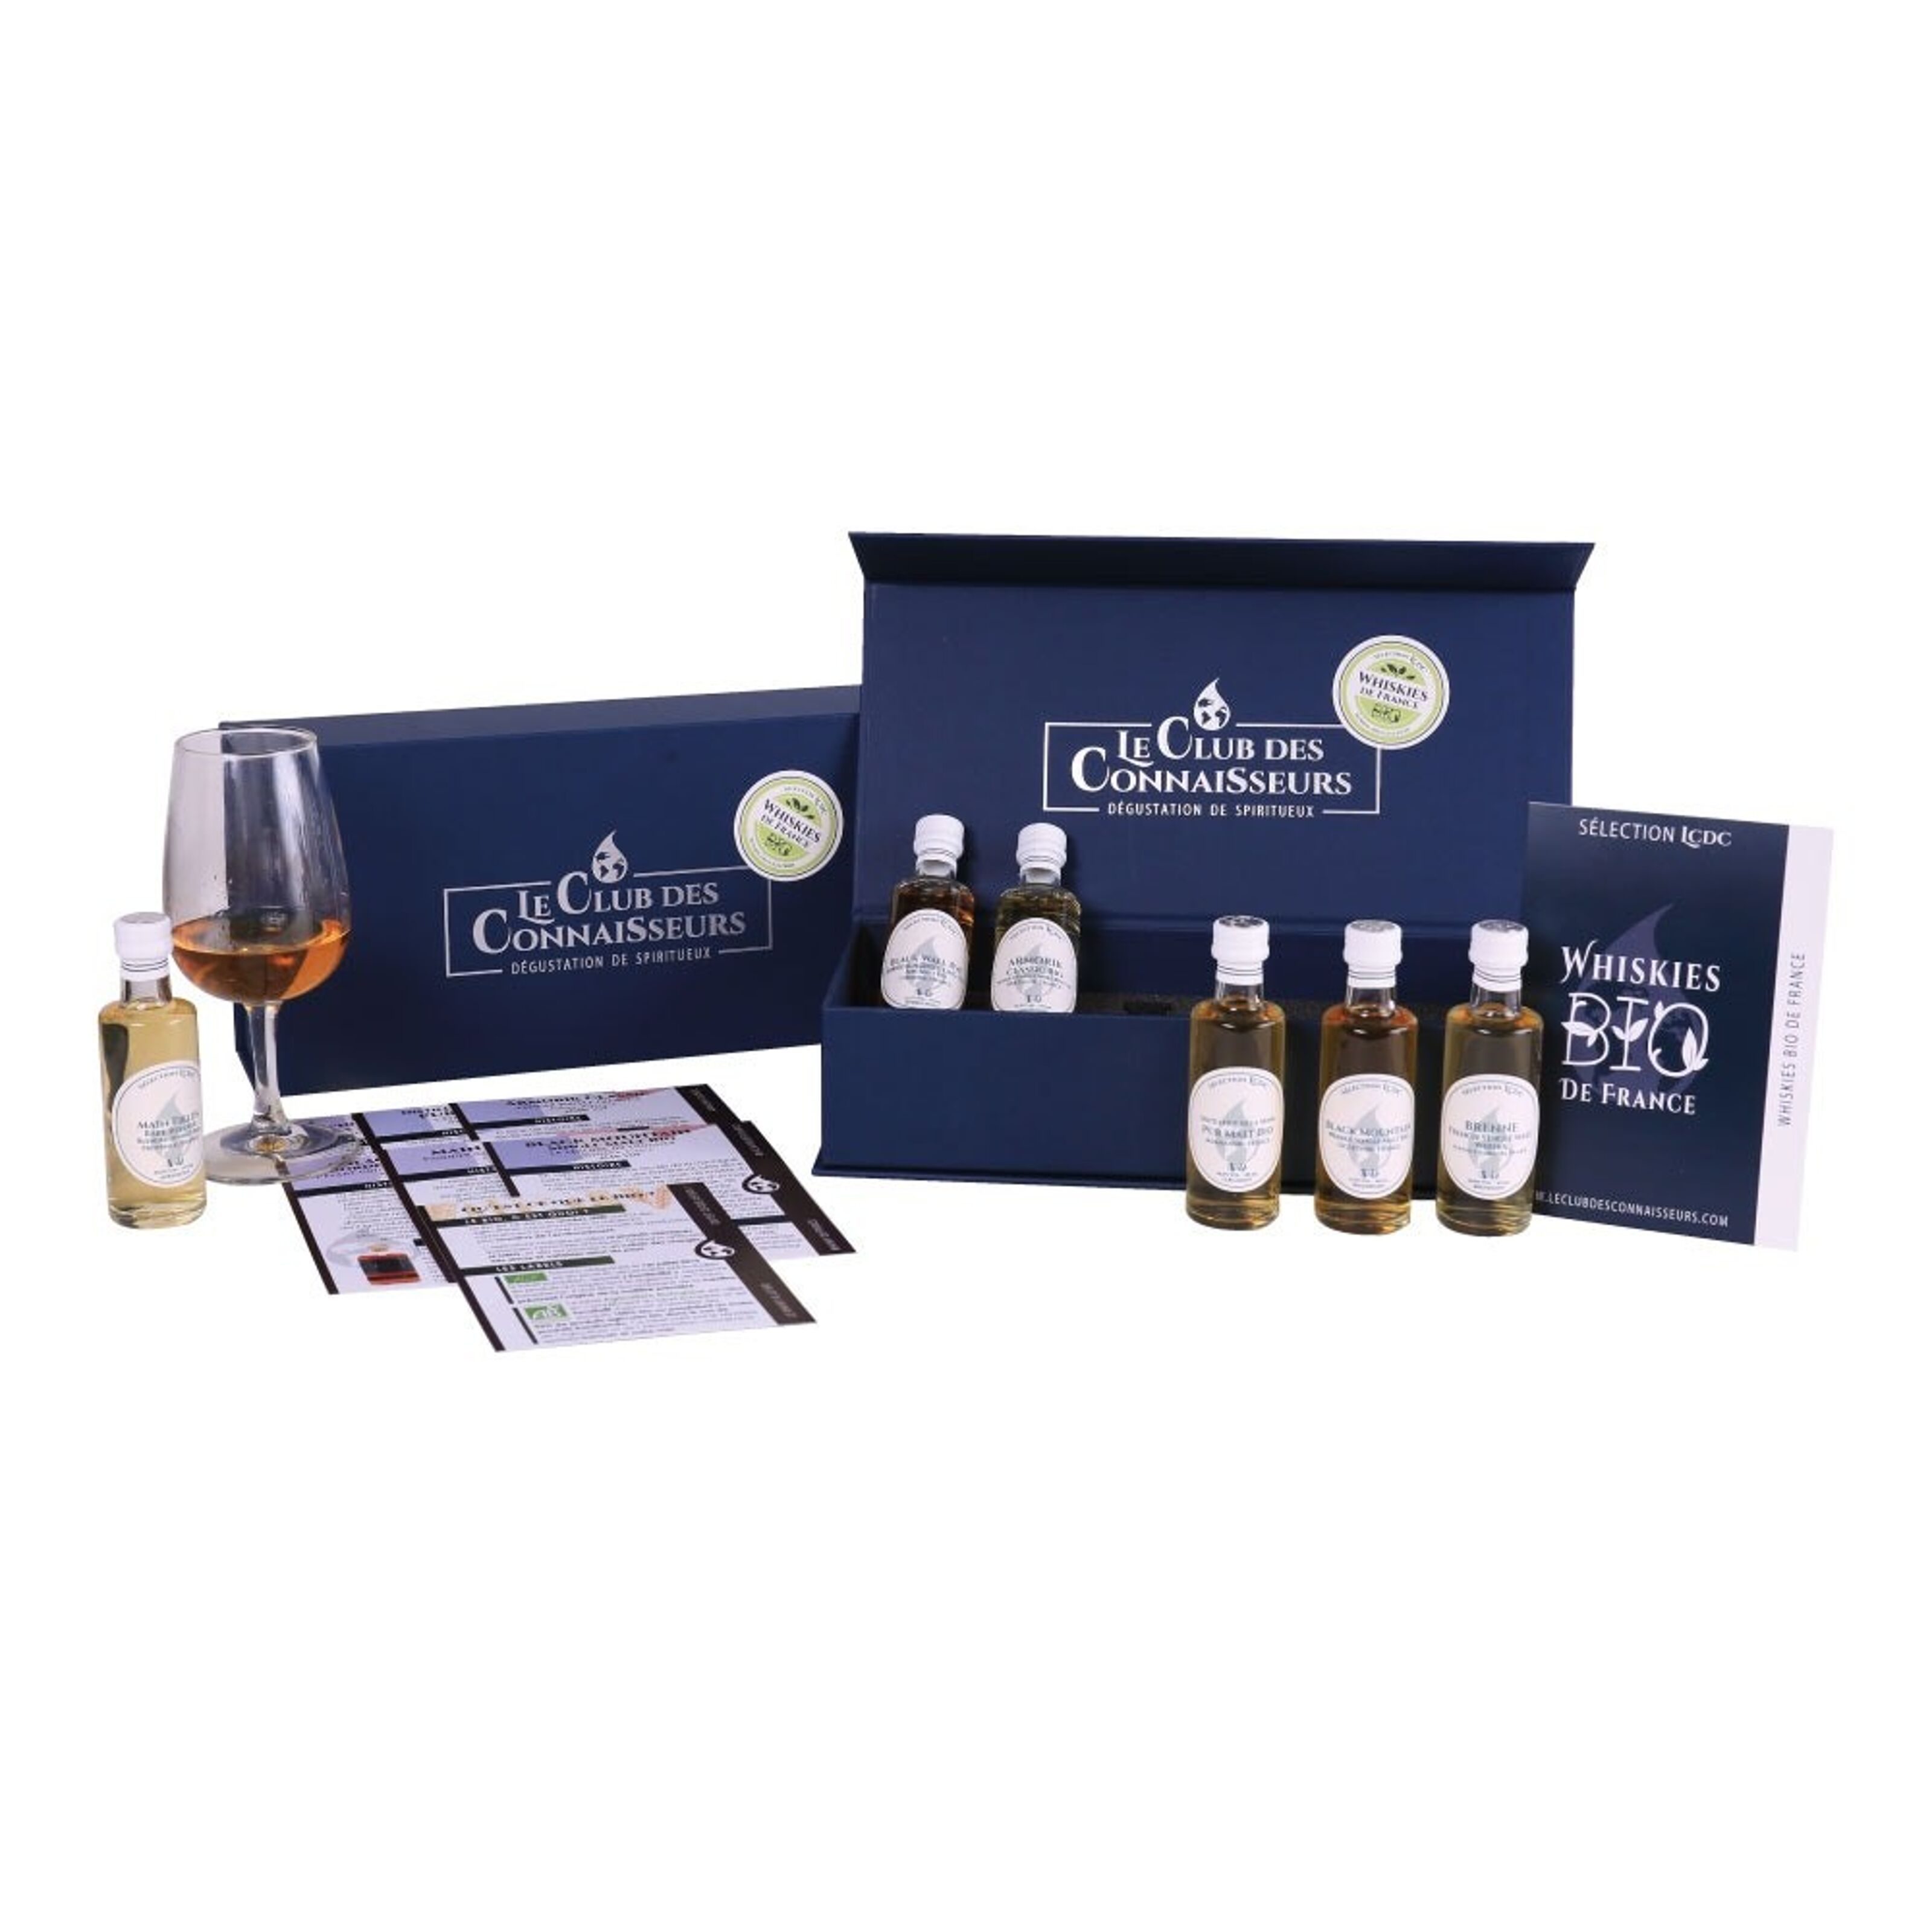 Buy wholesale World Tasting Whiskey Box - 6 x 40 ml Tasting Sheets Included  - Premium Prestige Gift Box - Solo or Duo